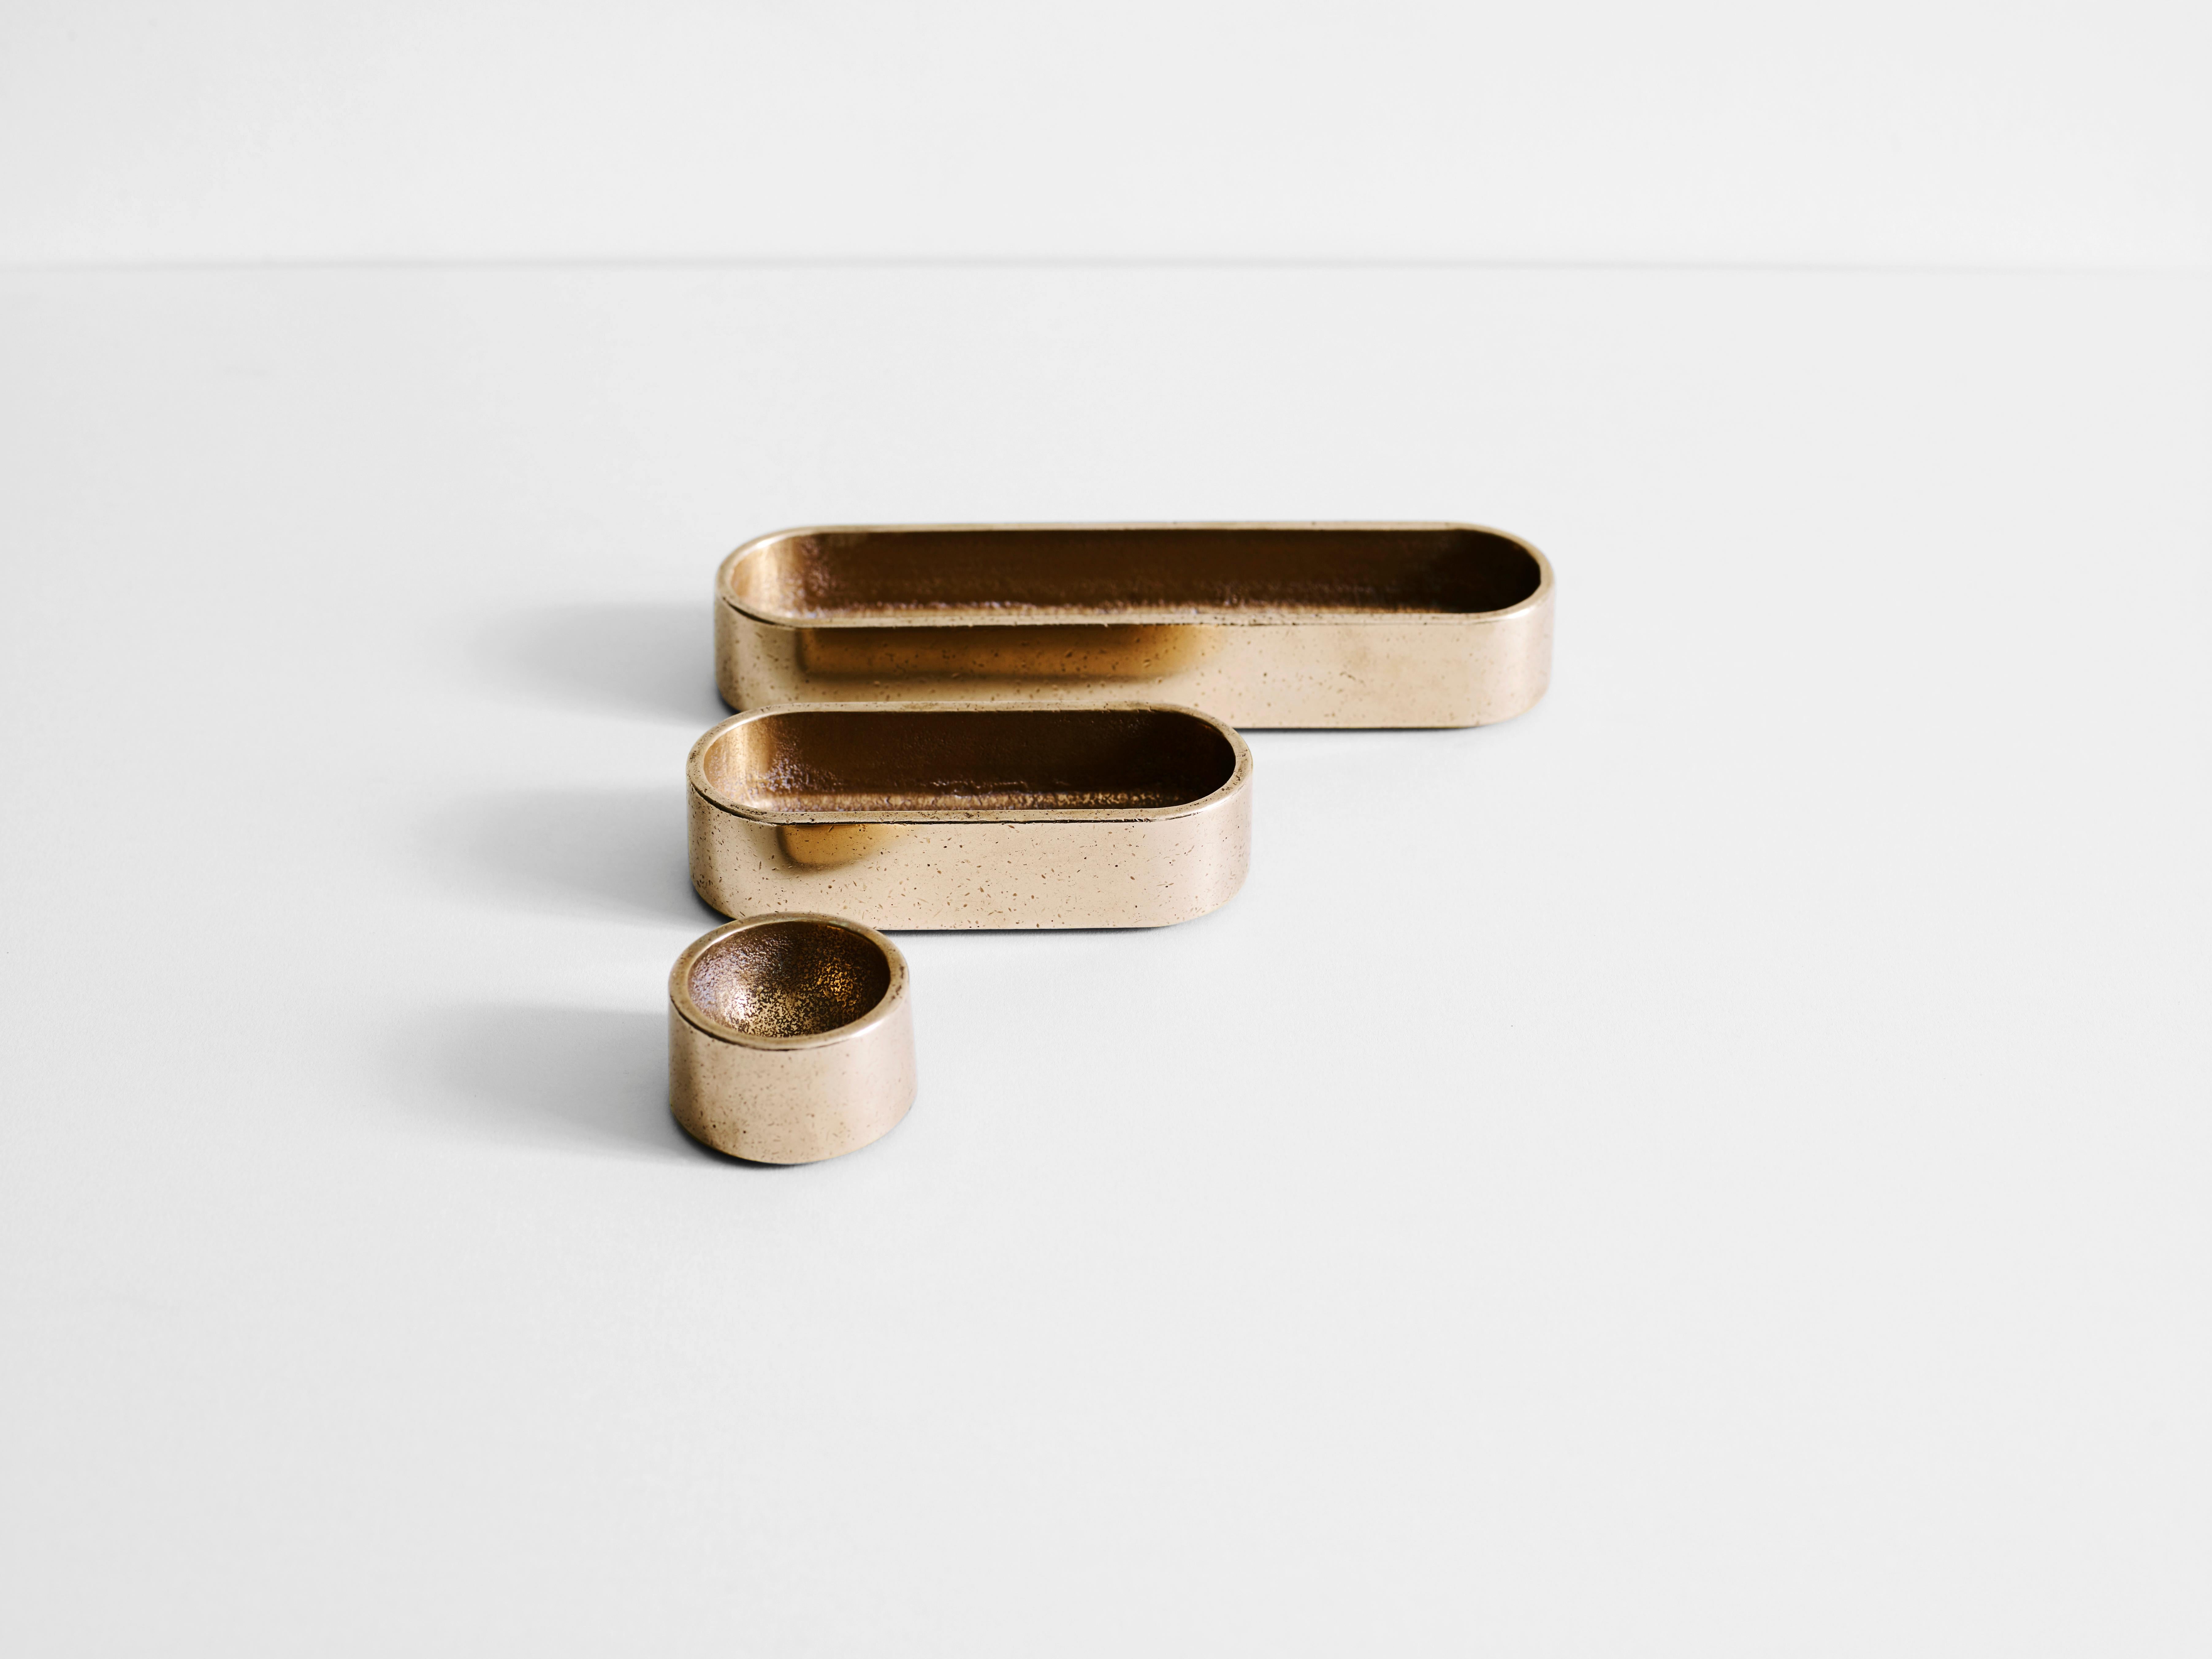 Bronze Stack Trays by Henry Wilson
Dimensions: W 25 x D 5 x H 10 cm
Materials: Bronze 

The stack trays are sold in a set of three that can be used together or individually. Group them on your desk, dining table, or next to the bed. The stack trays